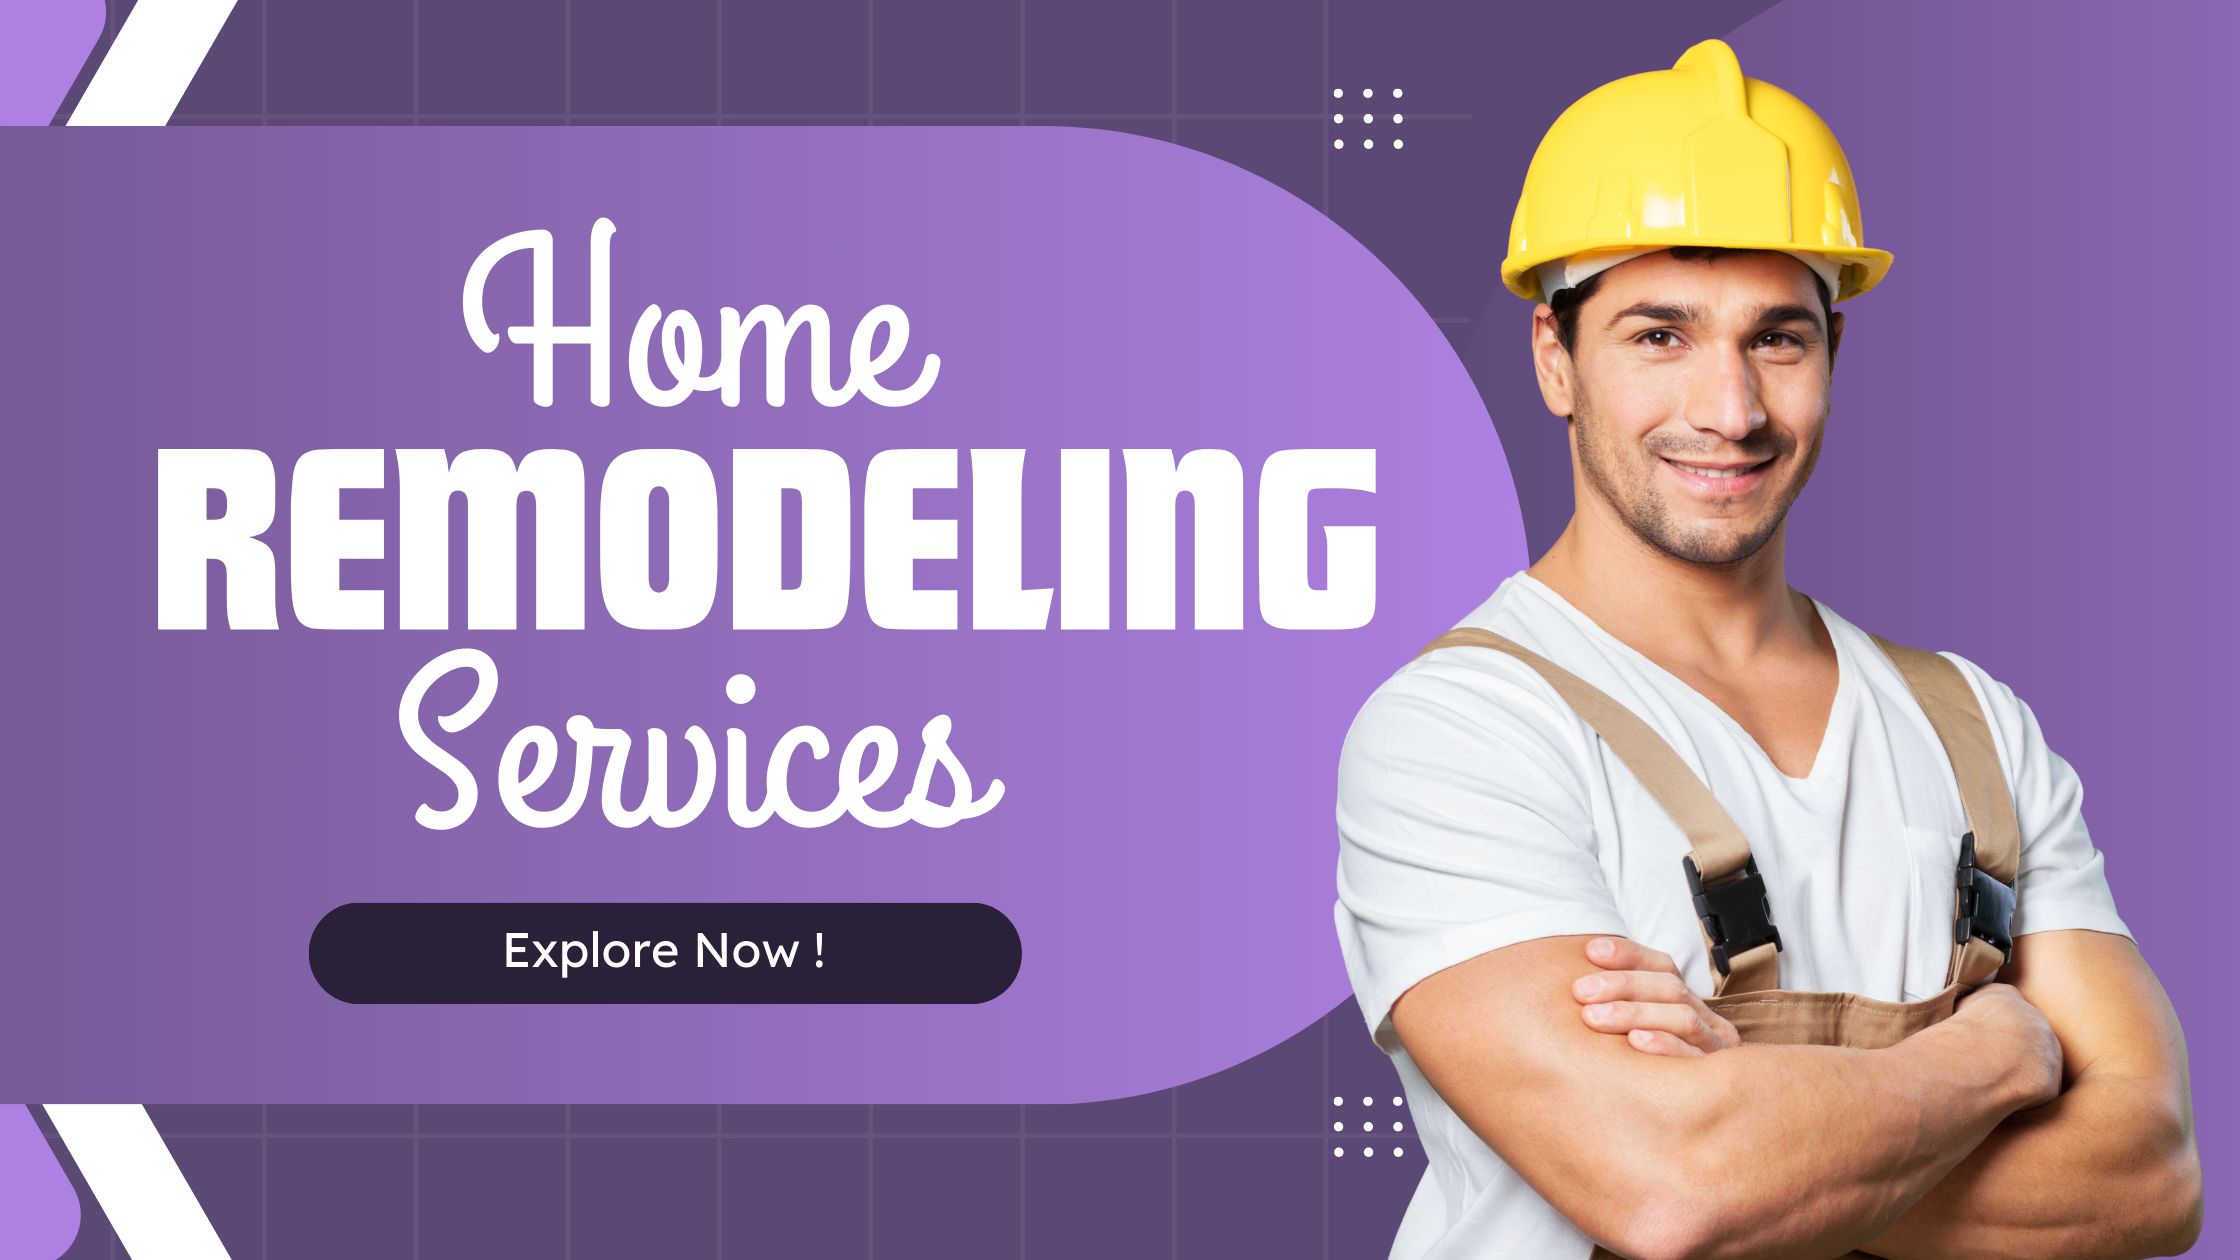 Is SEO Related to Services like Home Remodeling? 